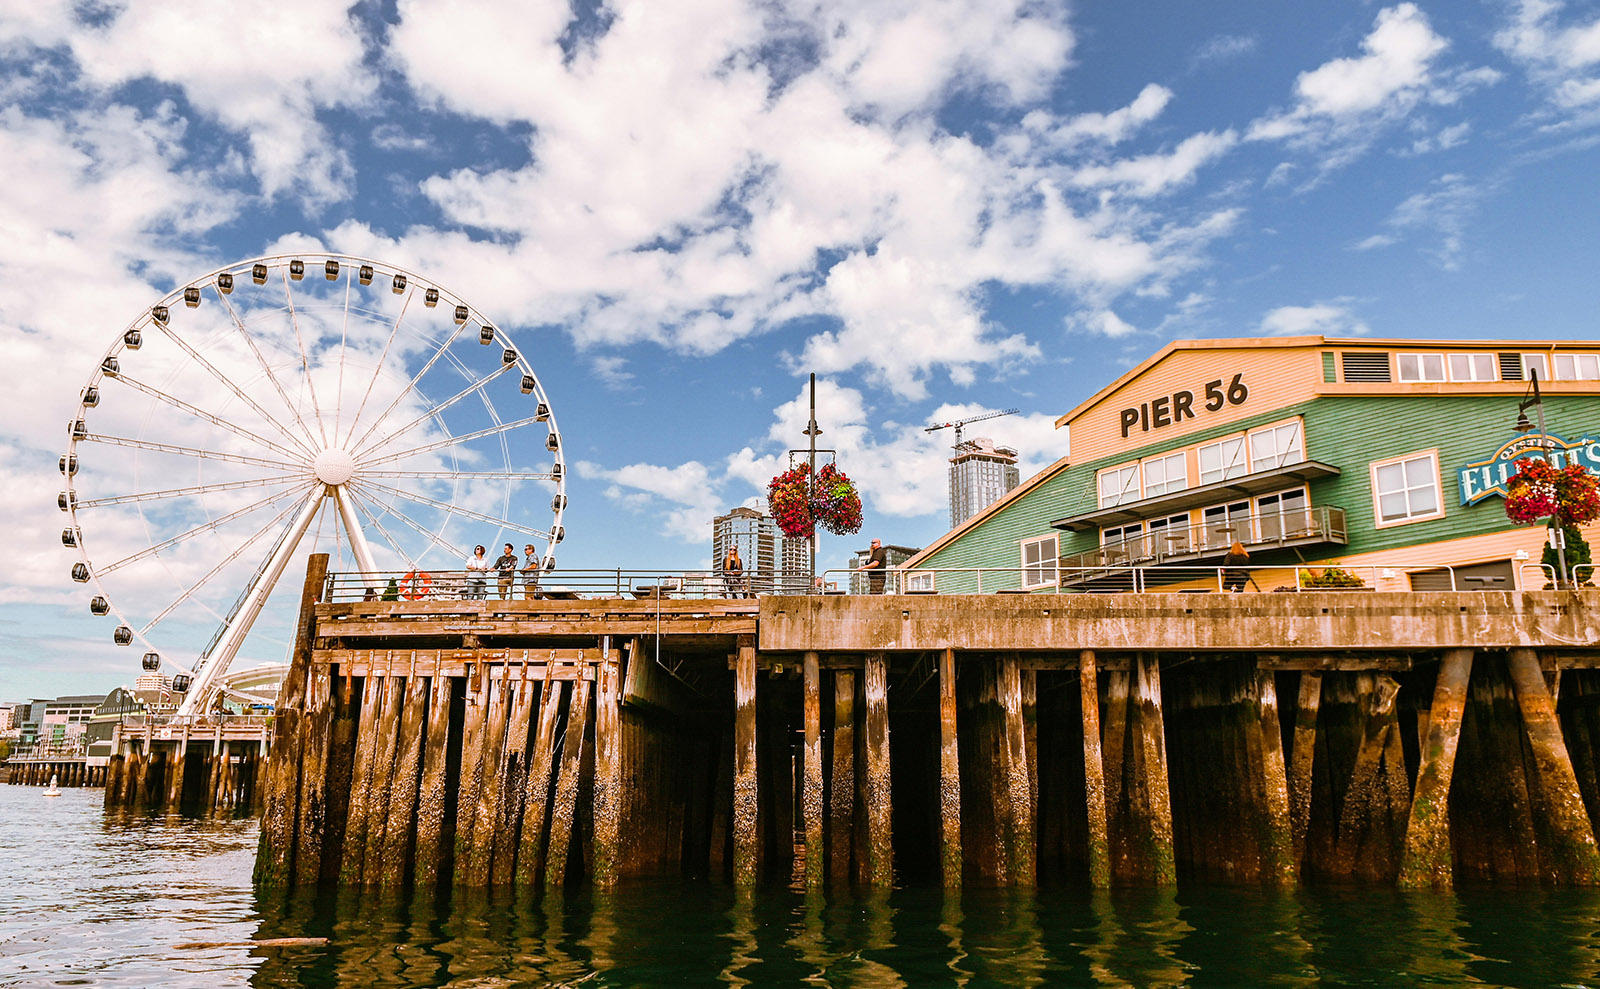 Seattle Piers, Banned Books, Extreme Airports, Hollywood Stories & More: Endnotes 03 May